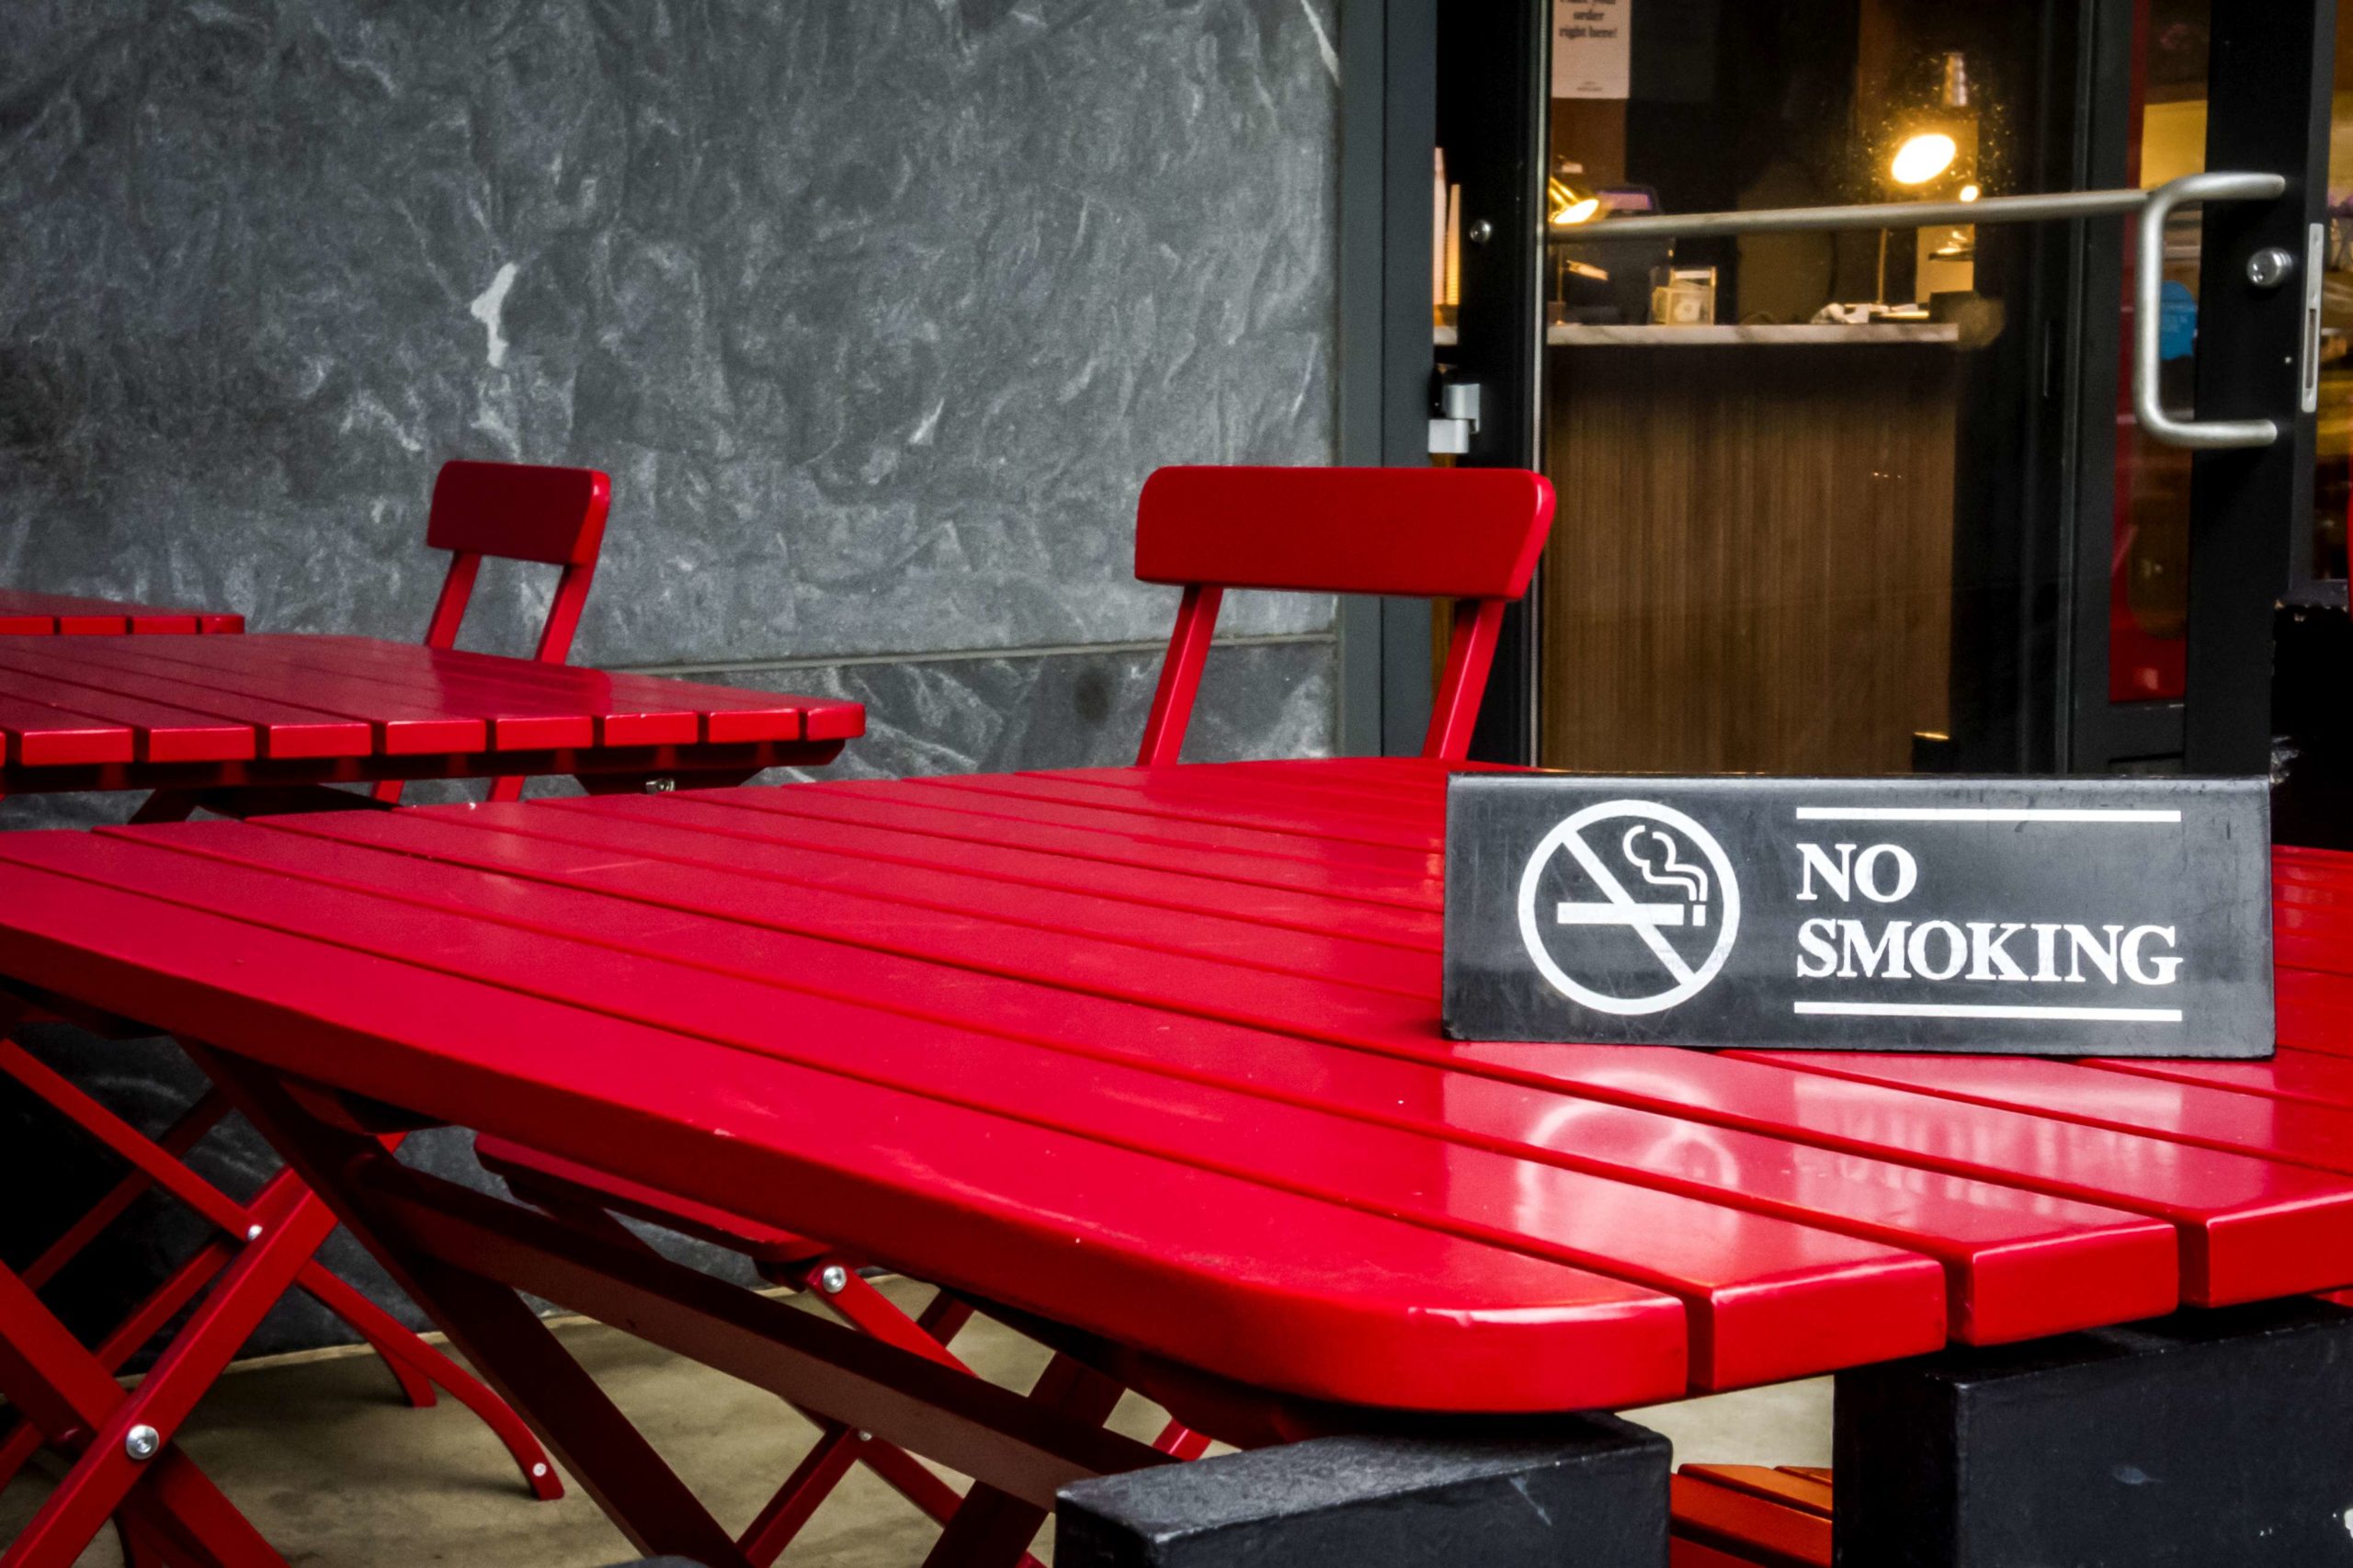 No smoking sign on a red table in a outdoor restaurant